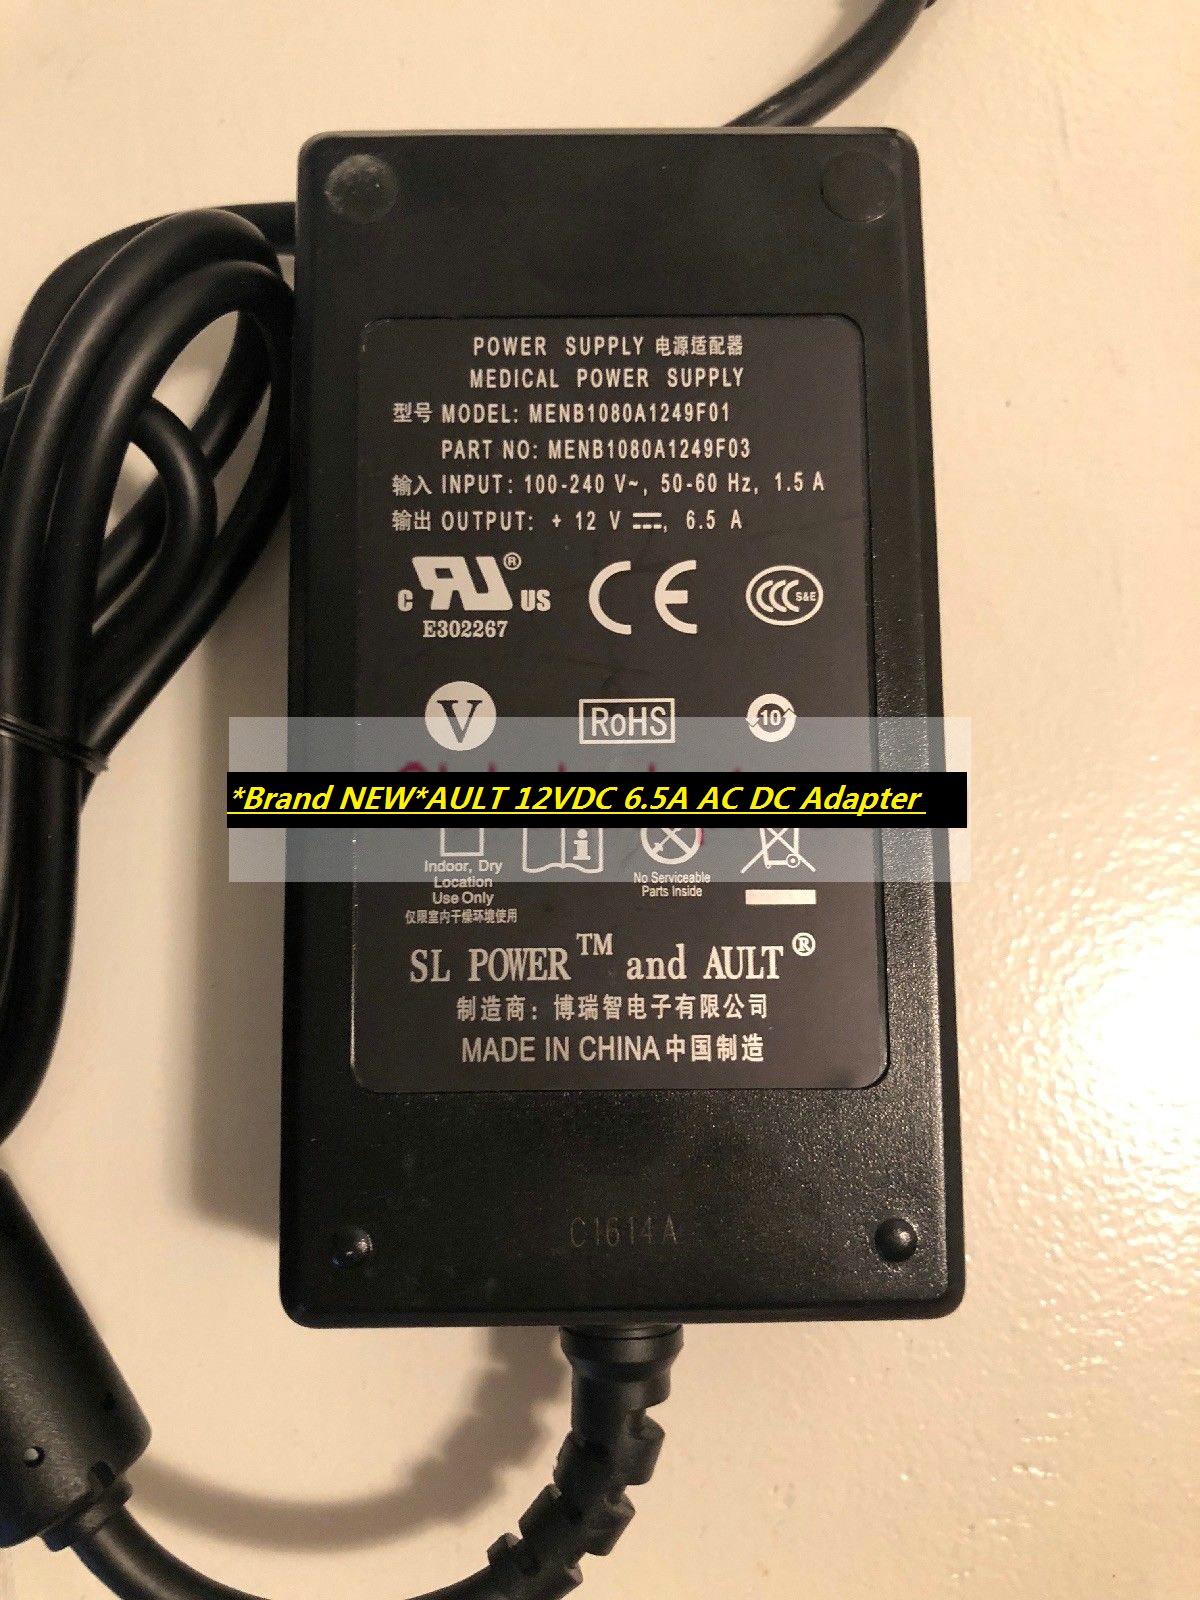 *Brand NEW*AULT MENB1080A1249F01 MENB1080A1249F03 Medical 12VDC 6.5A AC DC Adapter Power Supply